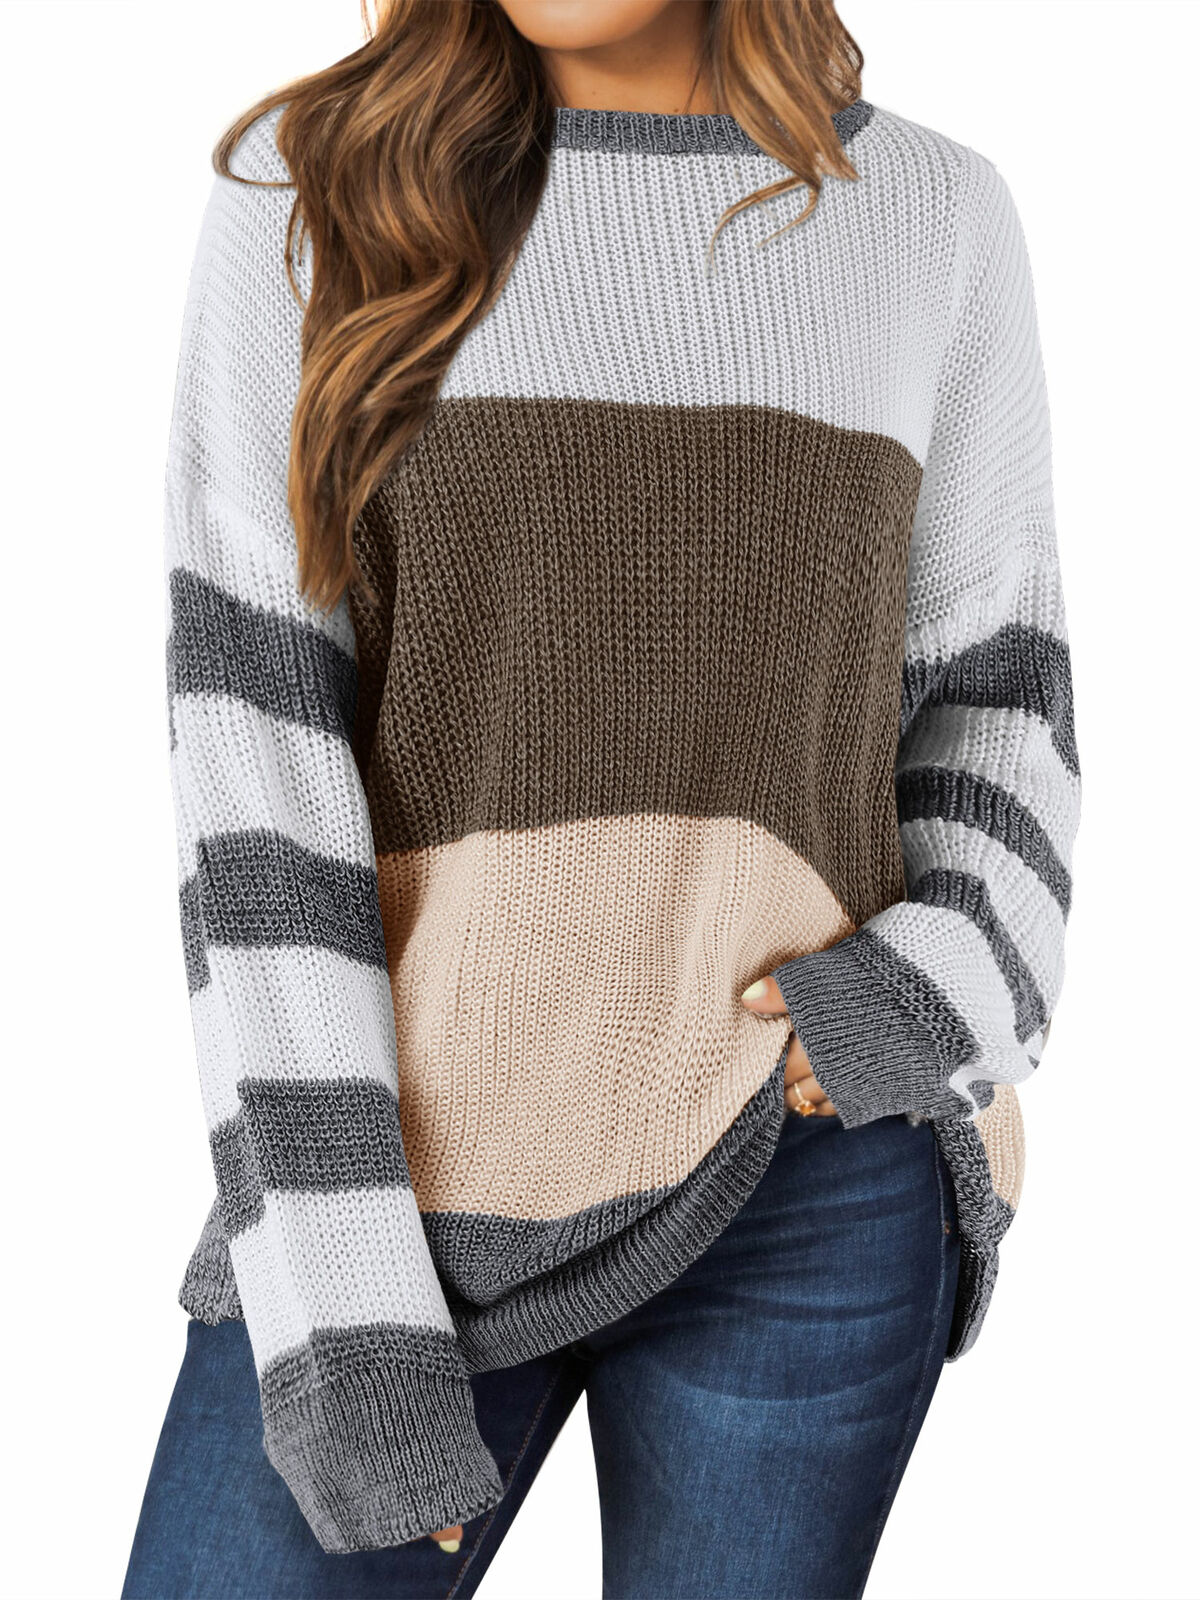 NEW Women Crew Neck Long Sleeve Stripes Color Block Knitted Sweater Medium M